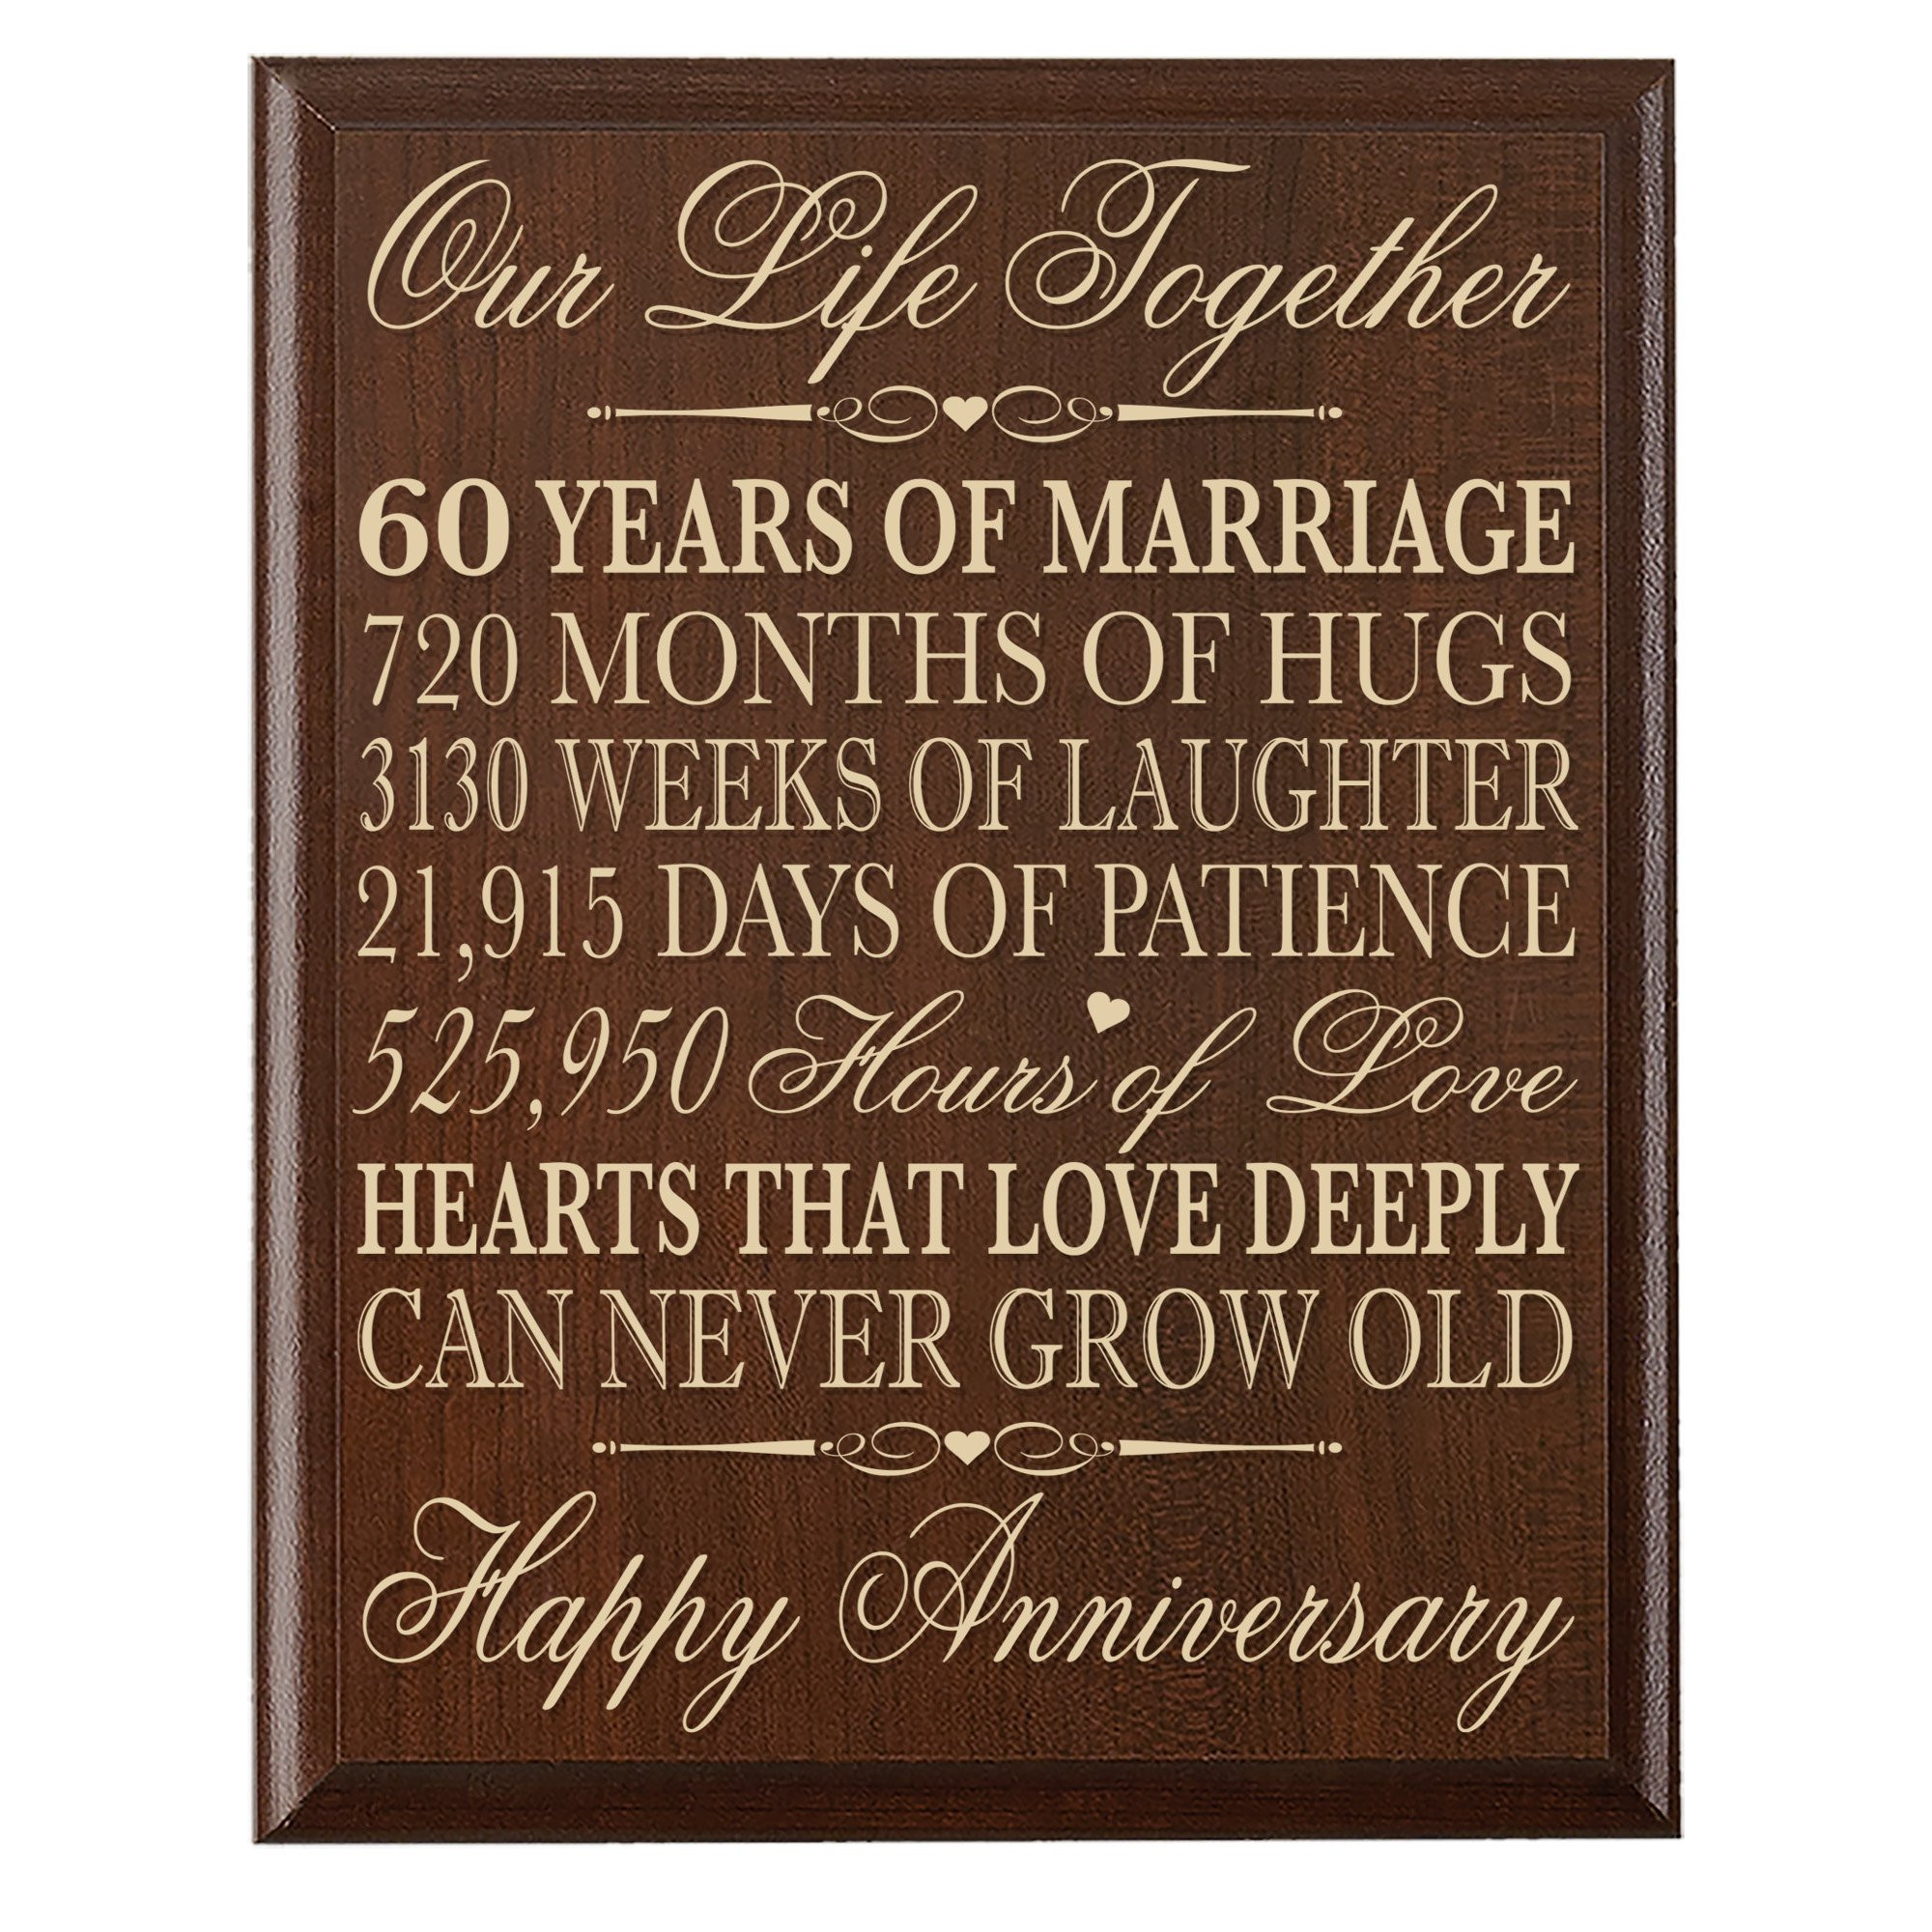 60 Year Anniversary Gift Ideas
 60th Wedding Anniversary Wall Plaque Gifts for Couple